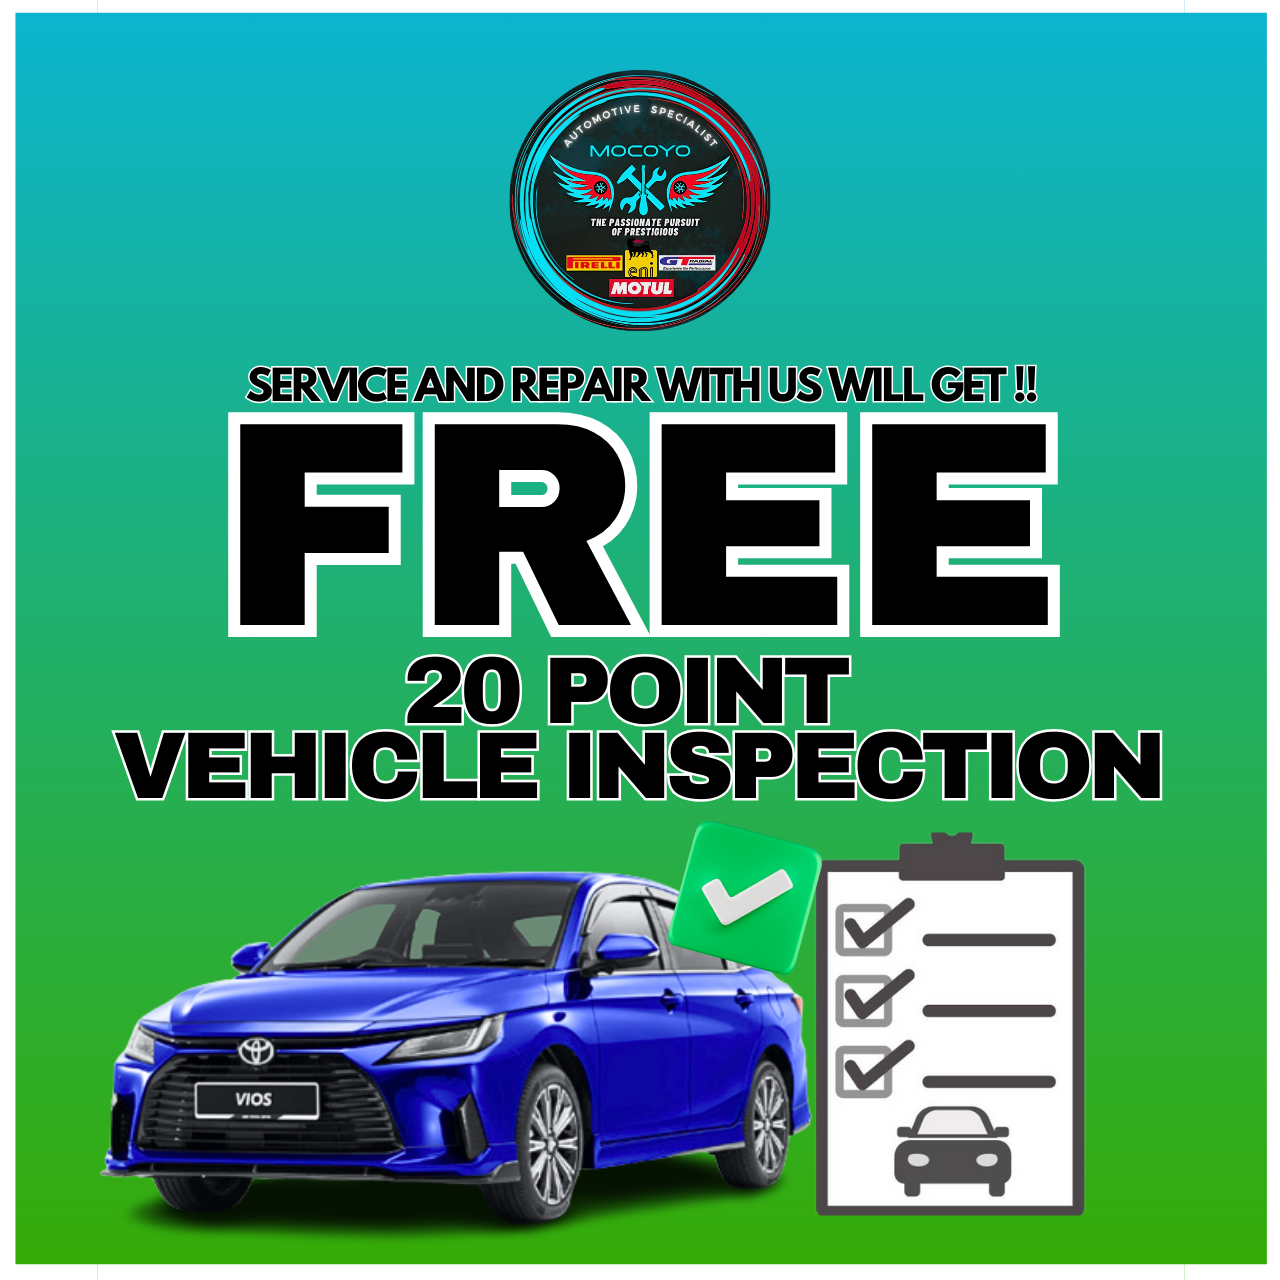 FREE 20 POINT VEHICLE INSPECTION 